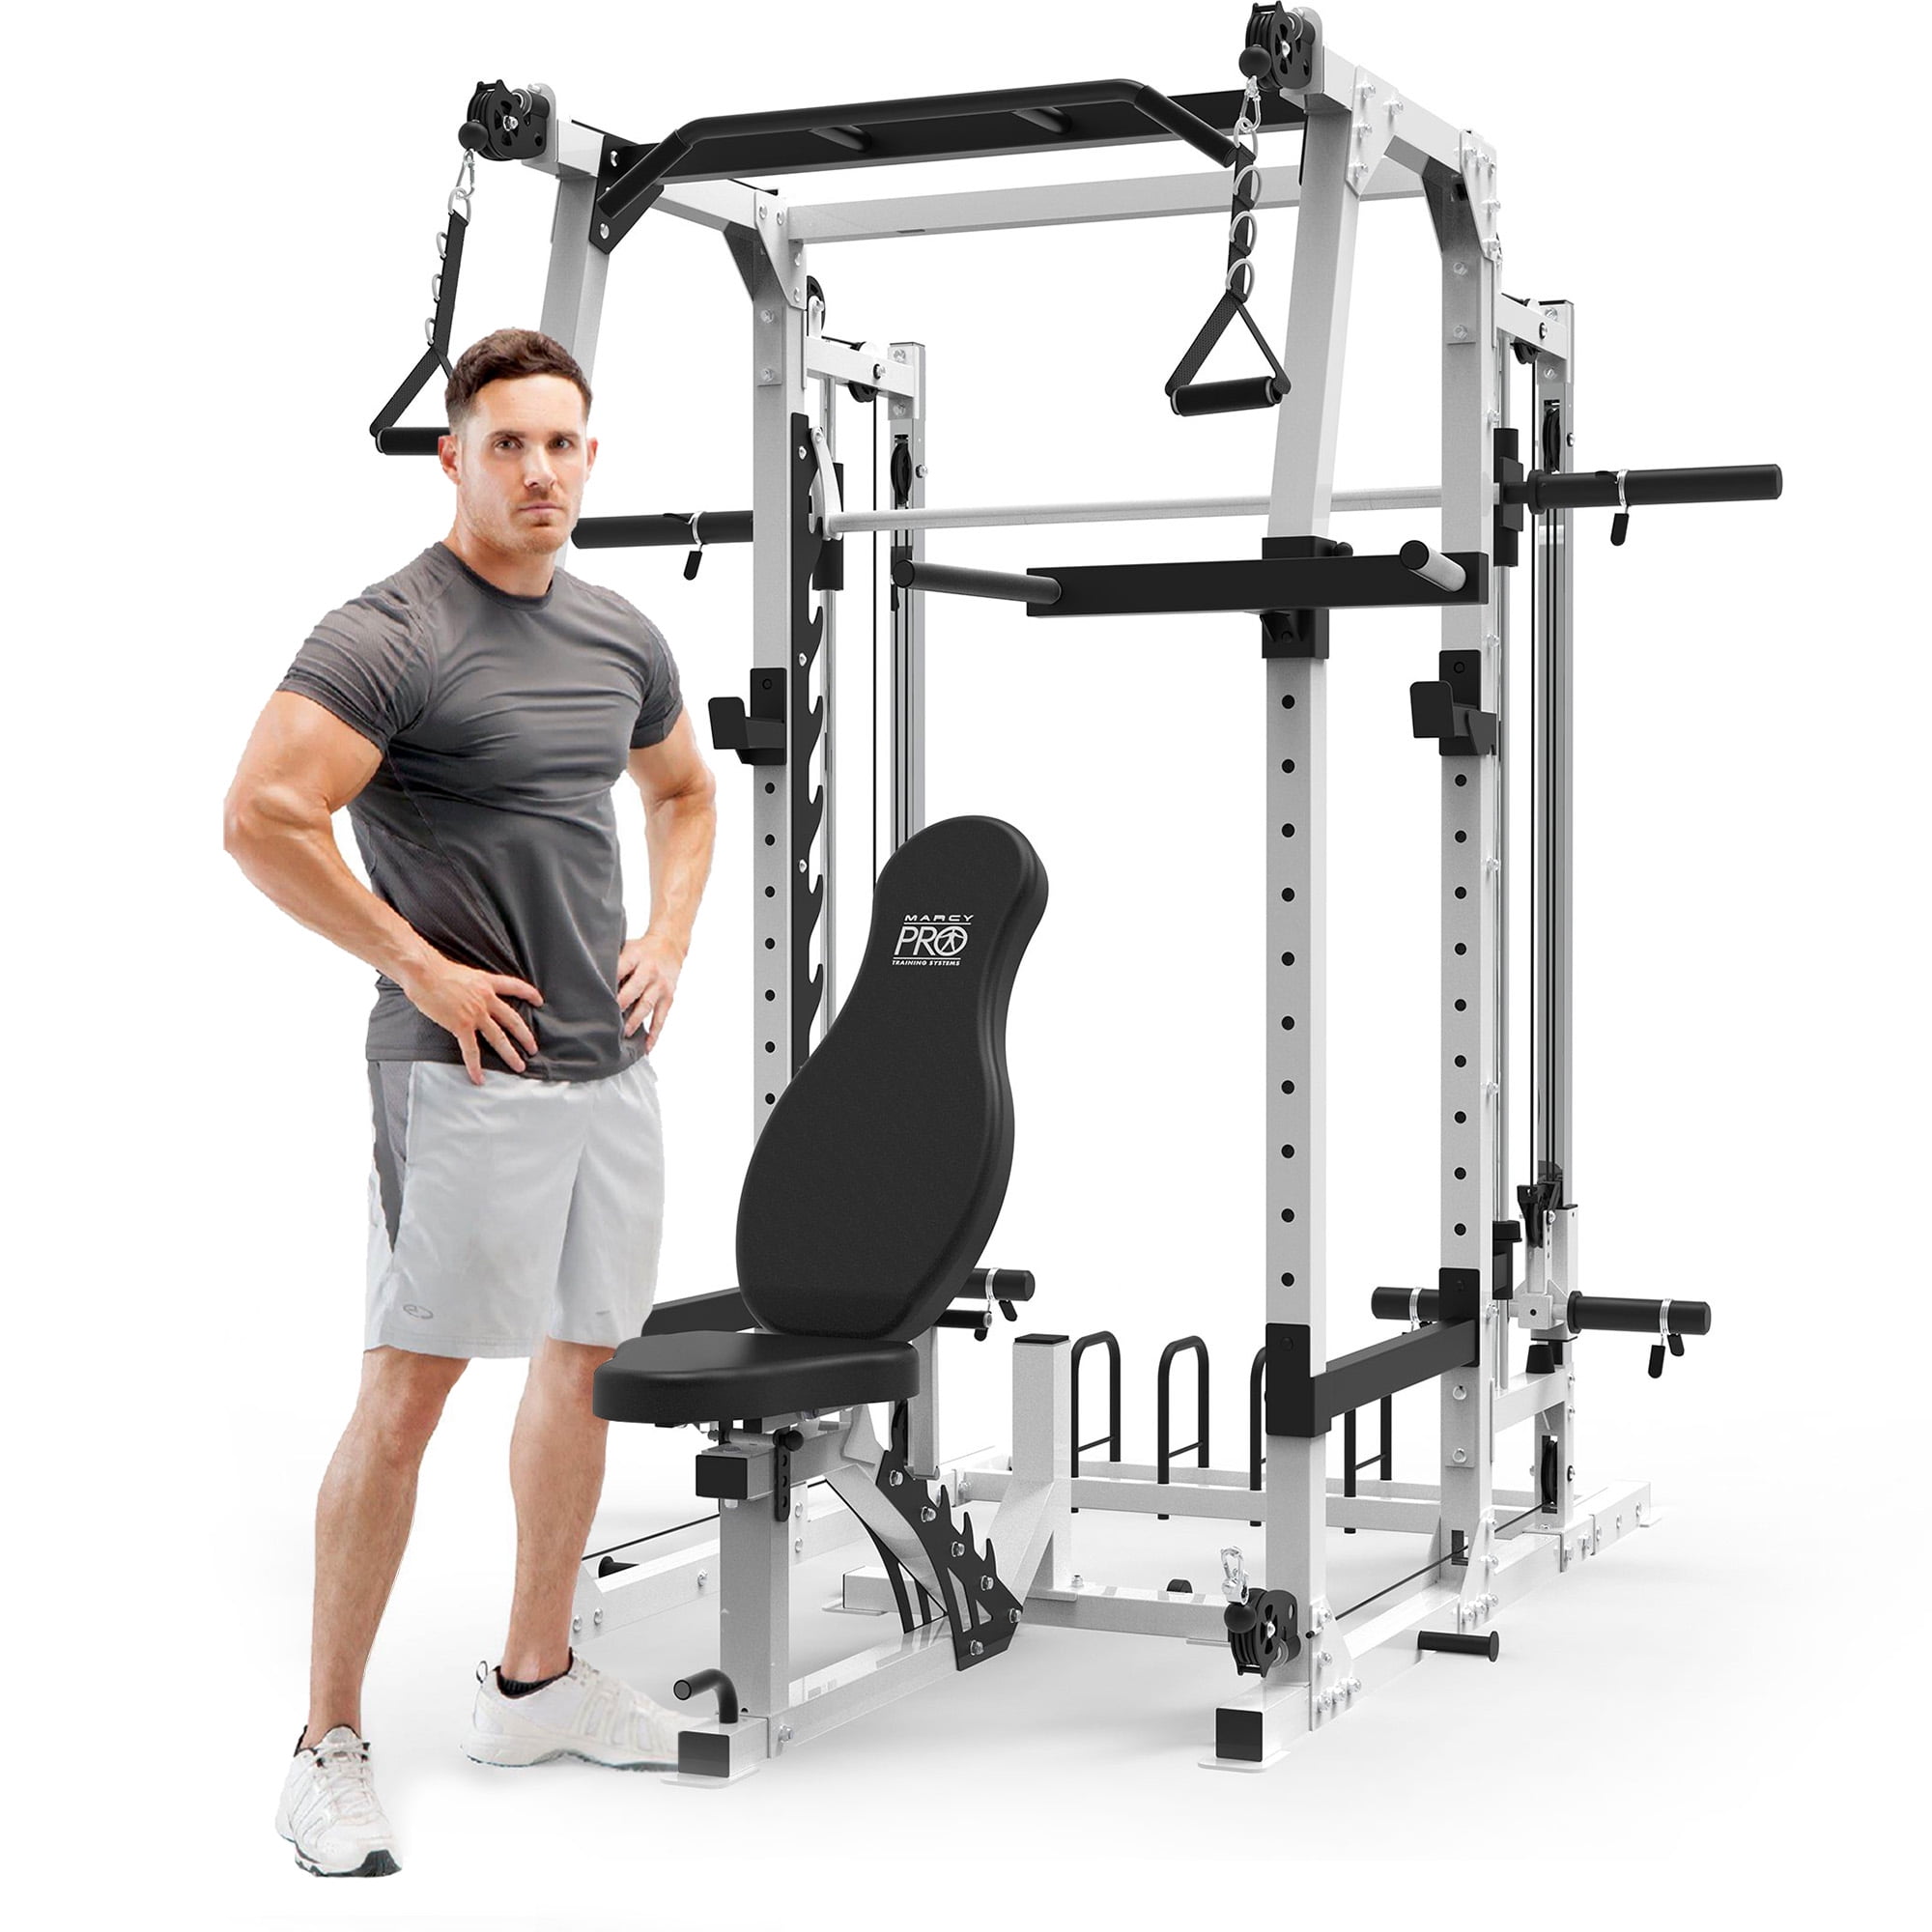 Marcy SM-7362 Pro Smith Machine Home Gym System for Full Body Training